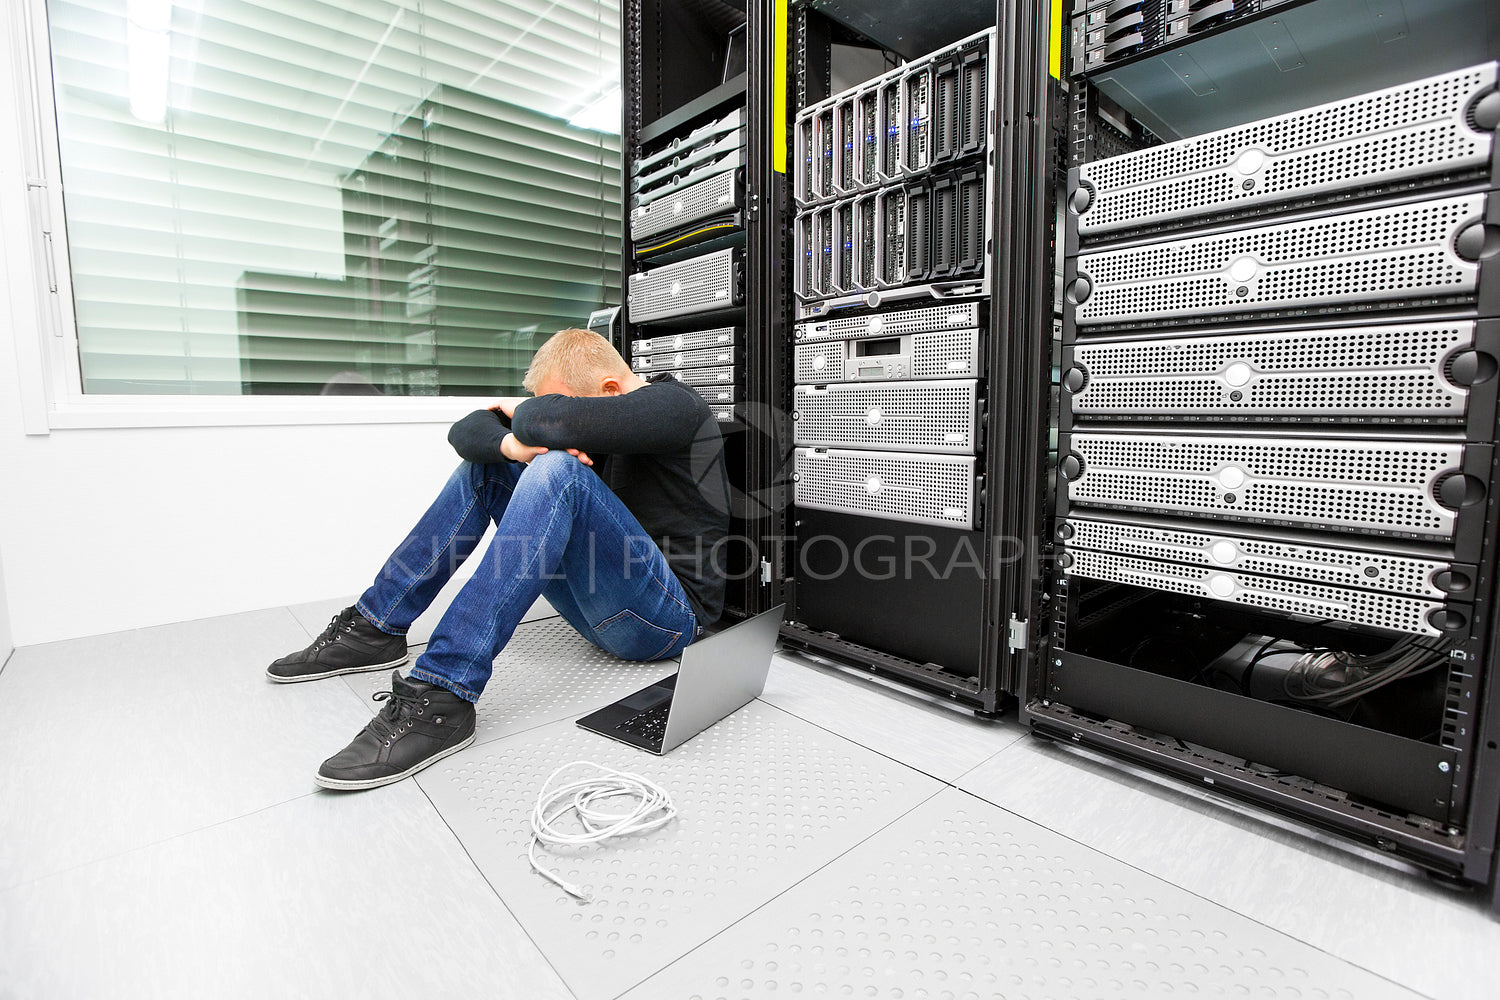 IT consultant with problems in datacenter